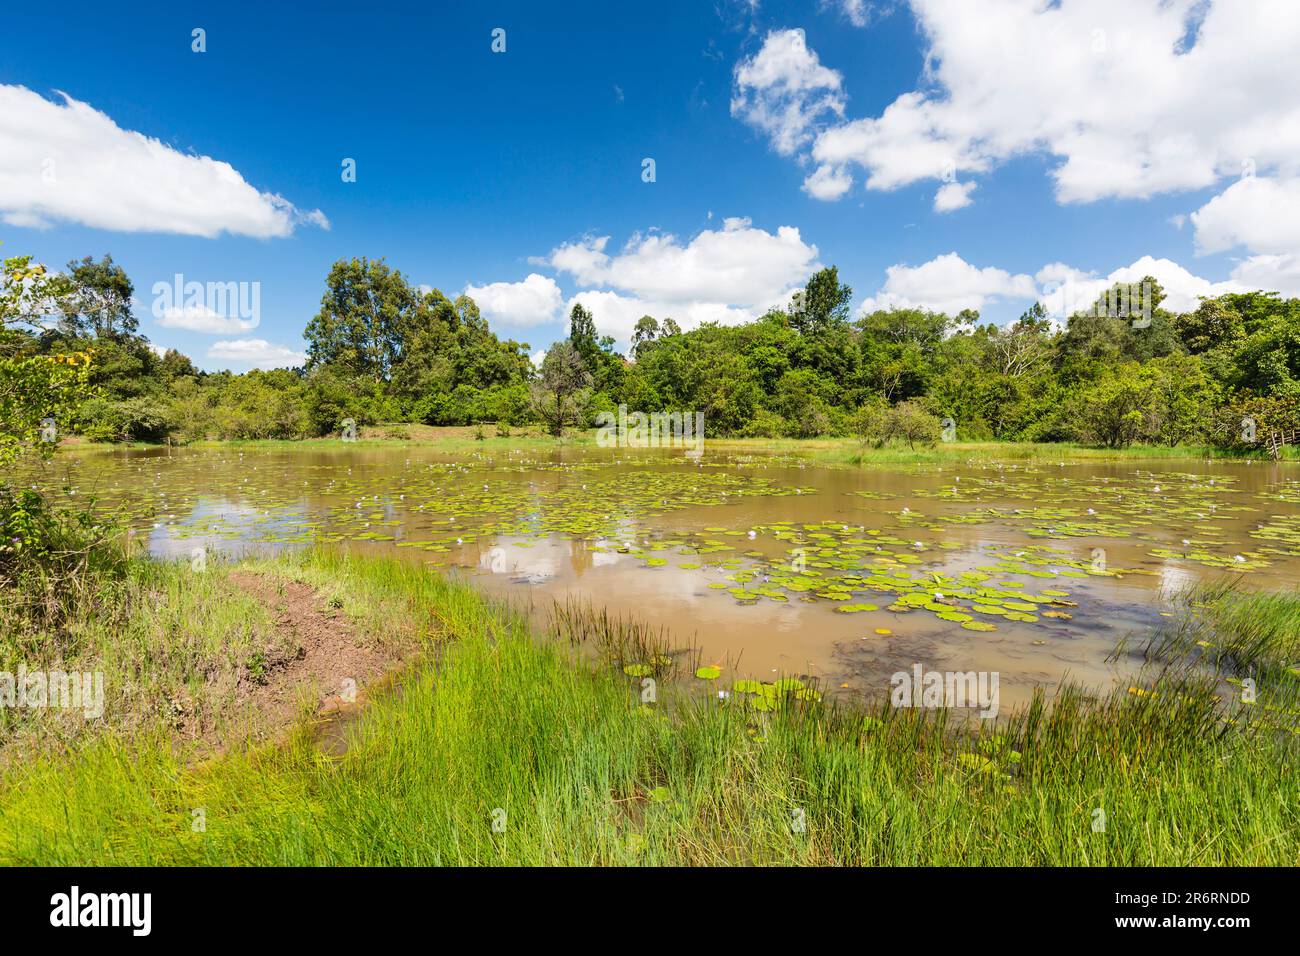 The beautiful Lily Lake in Karura Forest, Nairobi, Kenya with blue sky and fresh grass in the foreground. Stock Photo